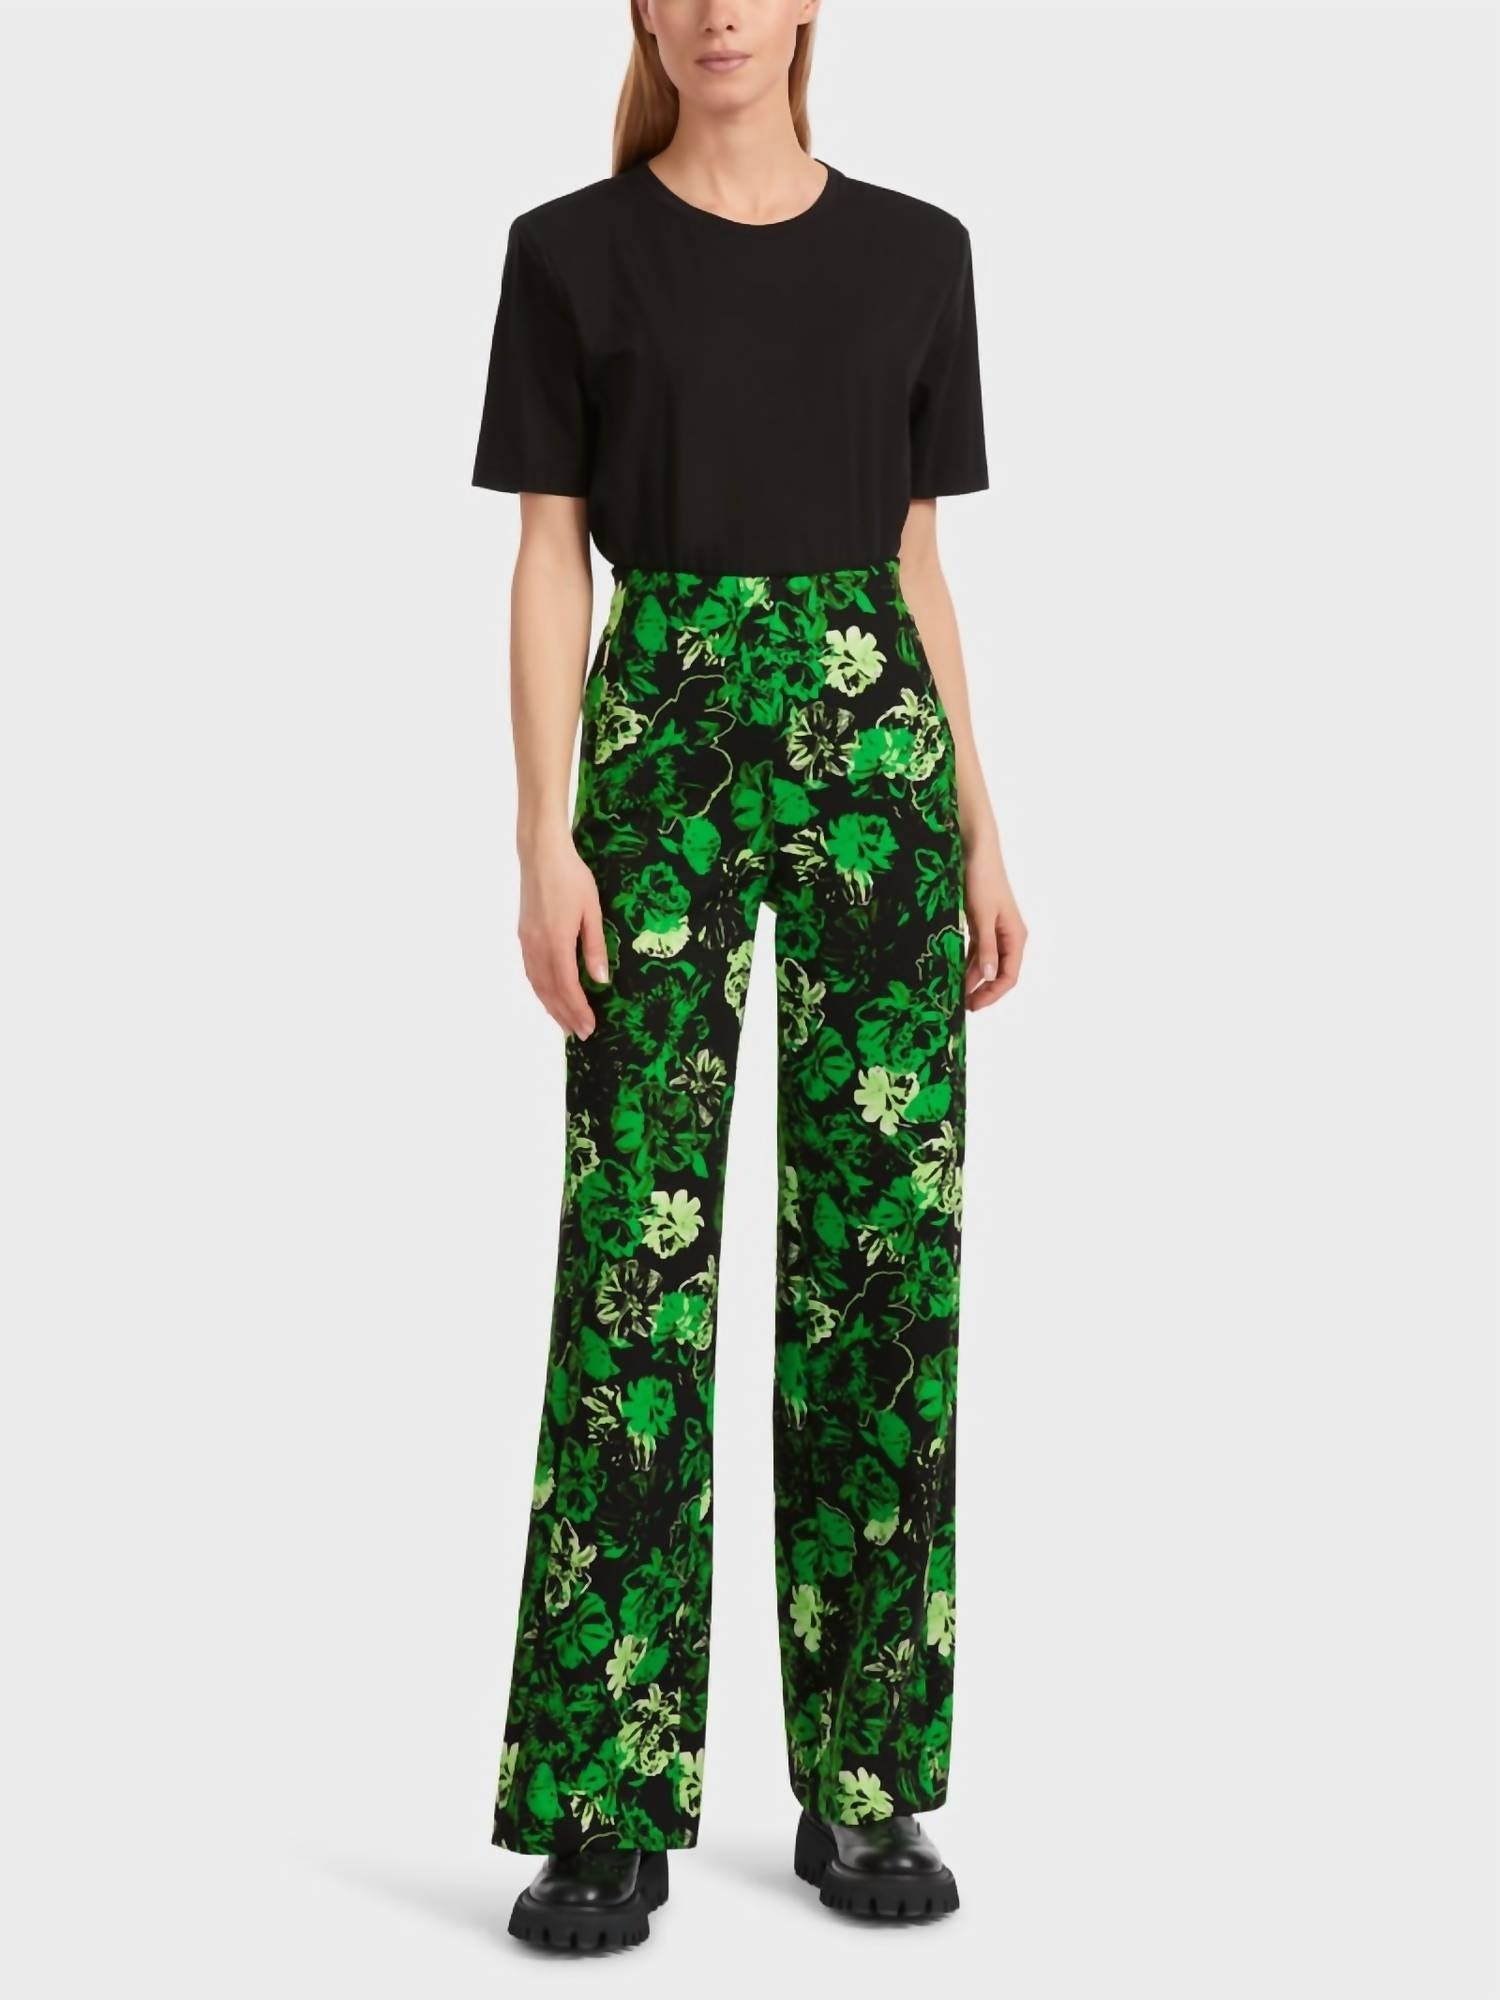 Shop Marc Cain Welkom Floral Design Pant Contrasts Extremes In Dark Apple Green Col. 549